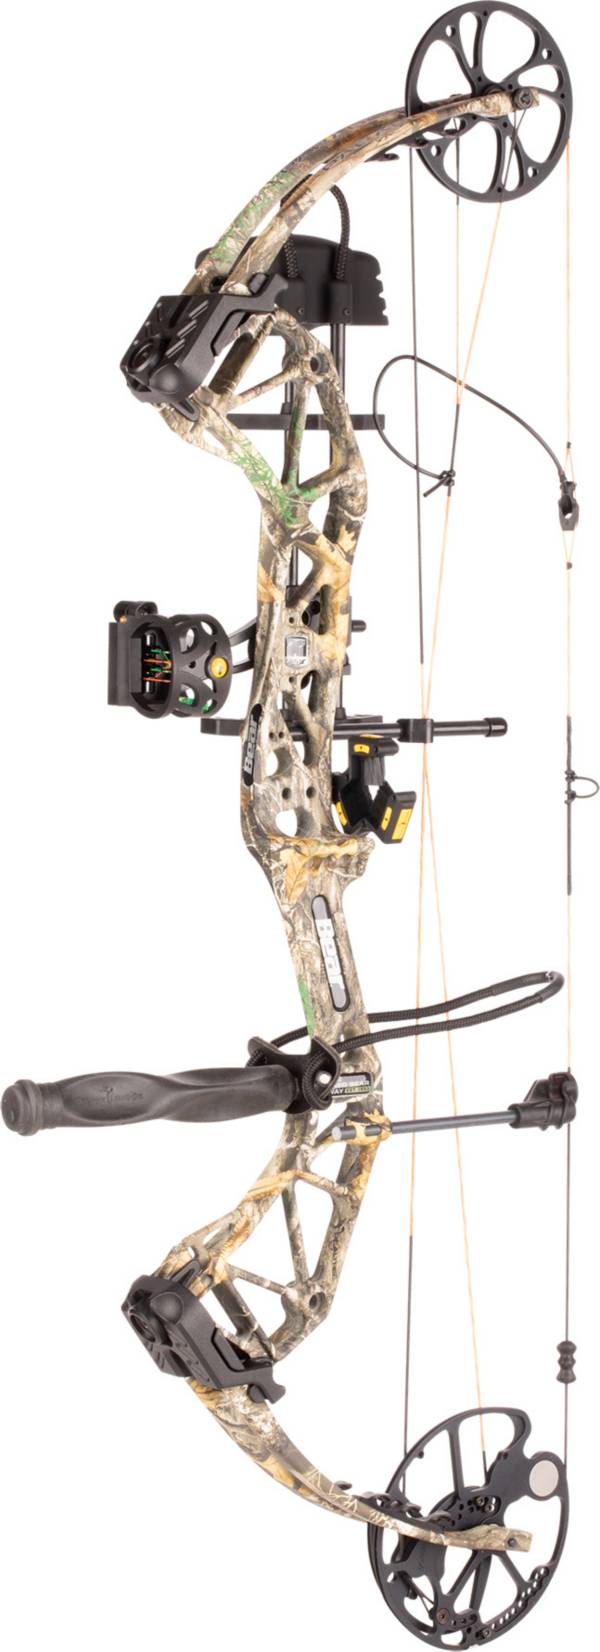 Bear Archery Paradox RTH Compound Bow Package product image